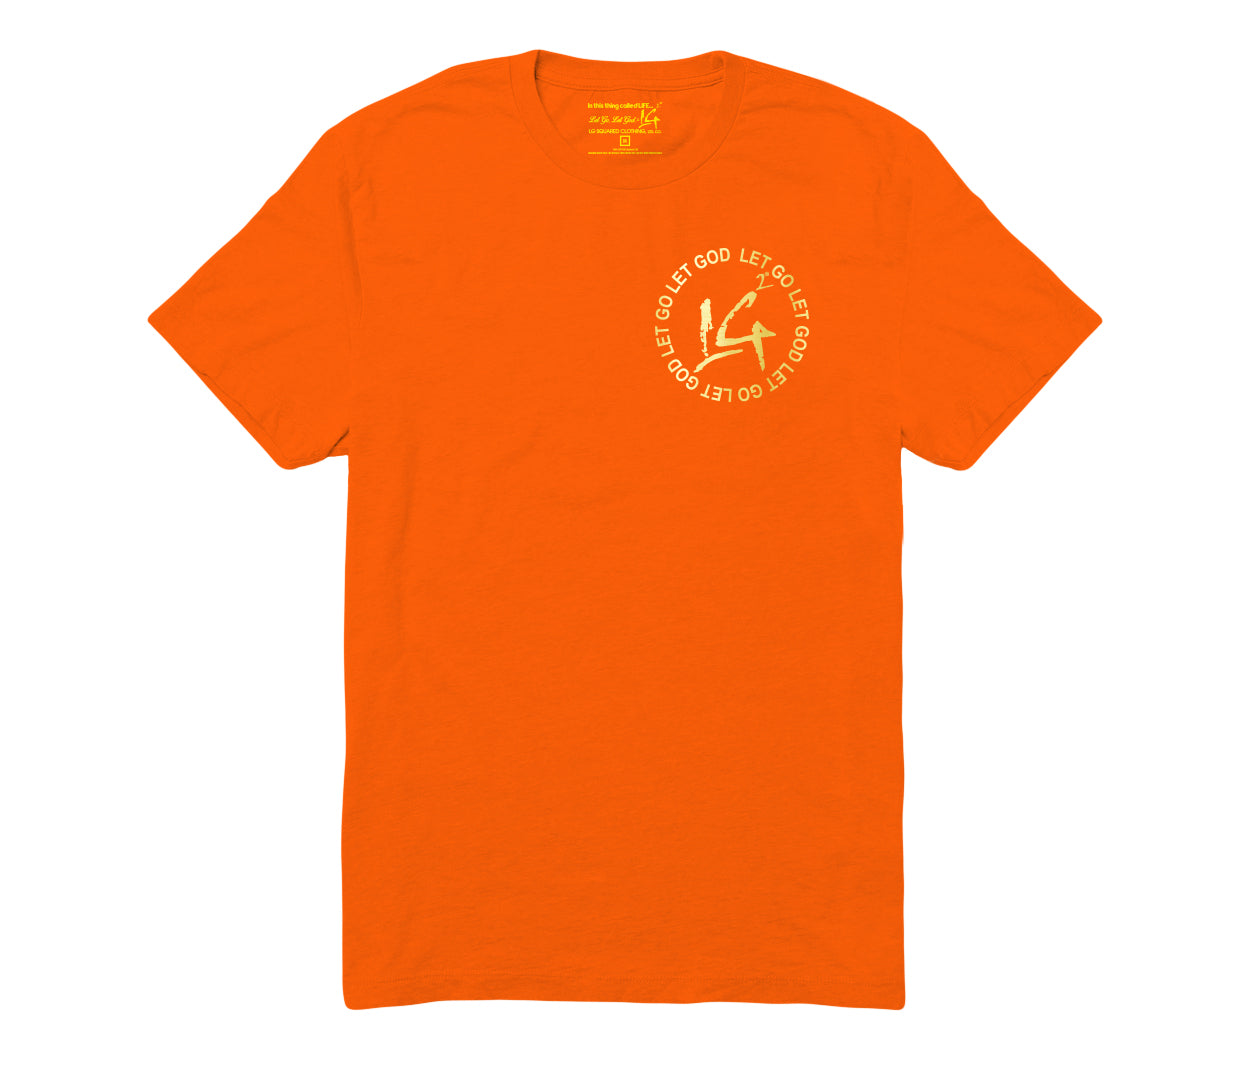 The LG² Squared Seal Tee